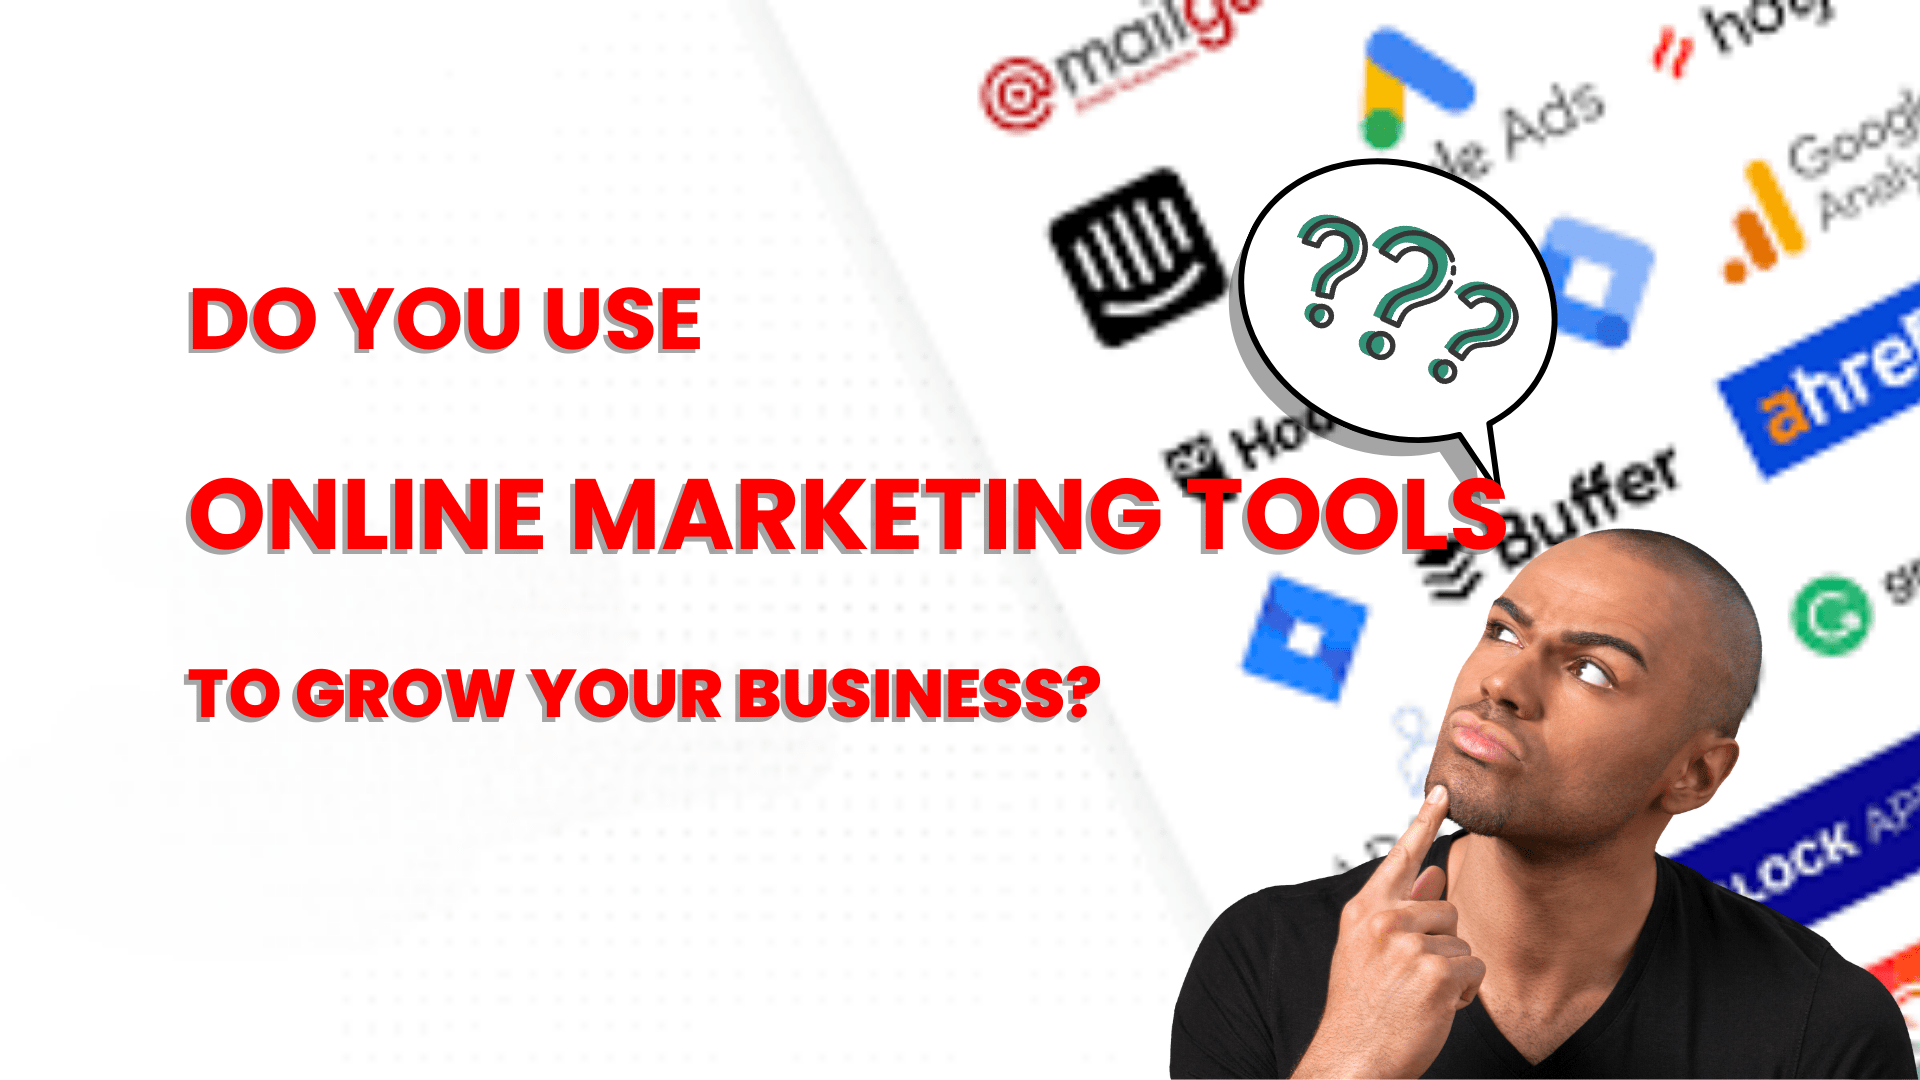 Do you use Online Marketing Tools to grow your Business?